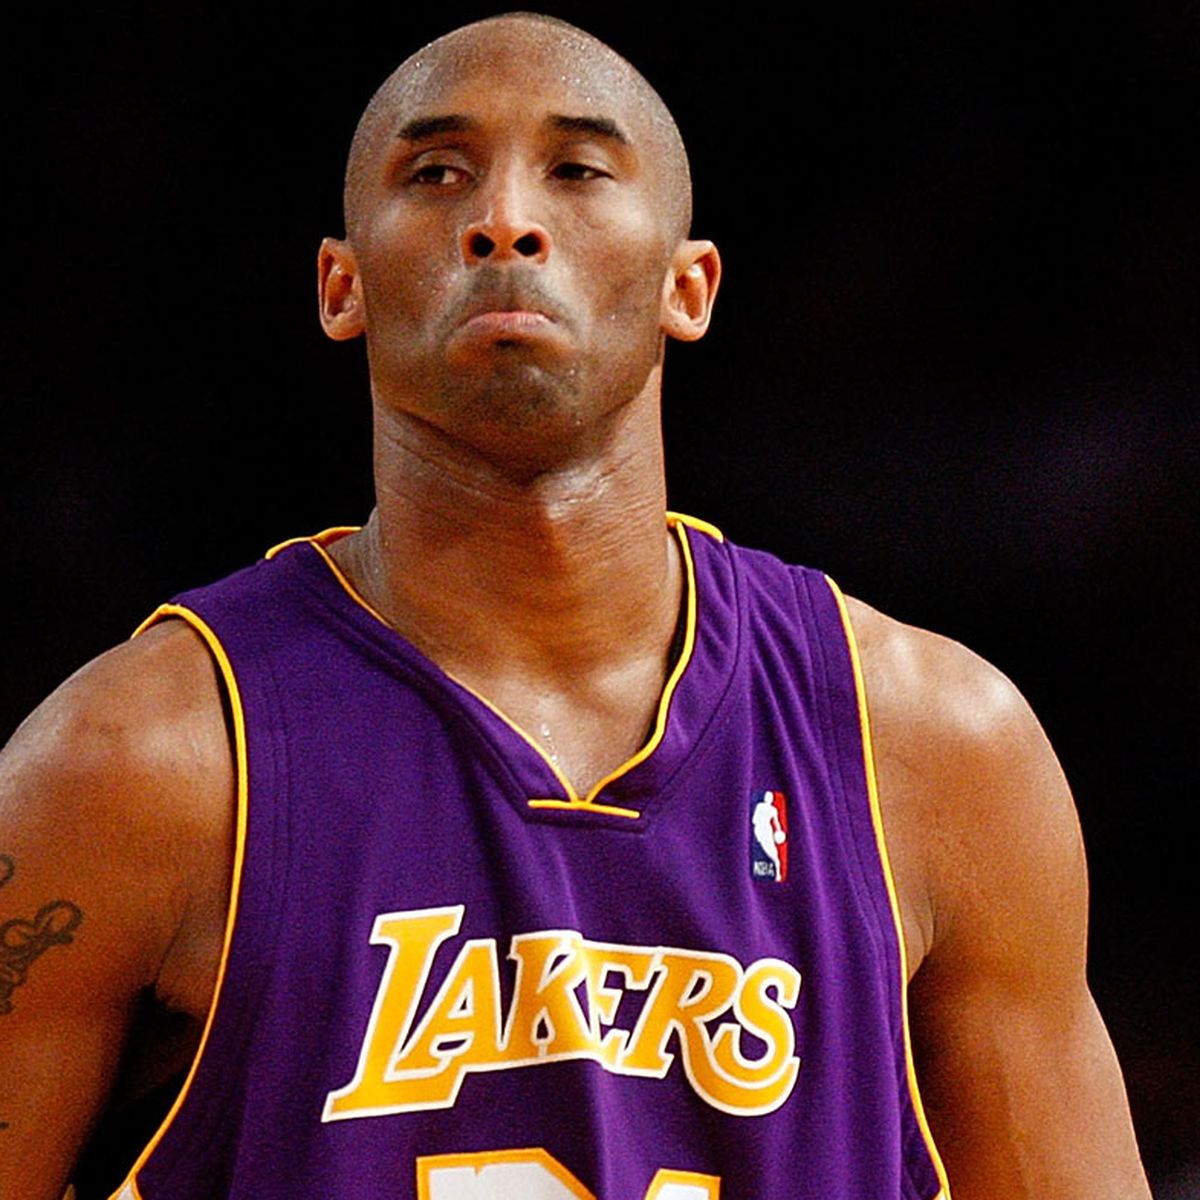 LAKERS TO WEAR BLACK MAMBA JERSEYS In honor of Kobe Bryant - Basketball  Network - Your daily dose of basketball